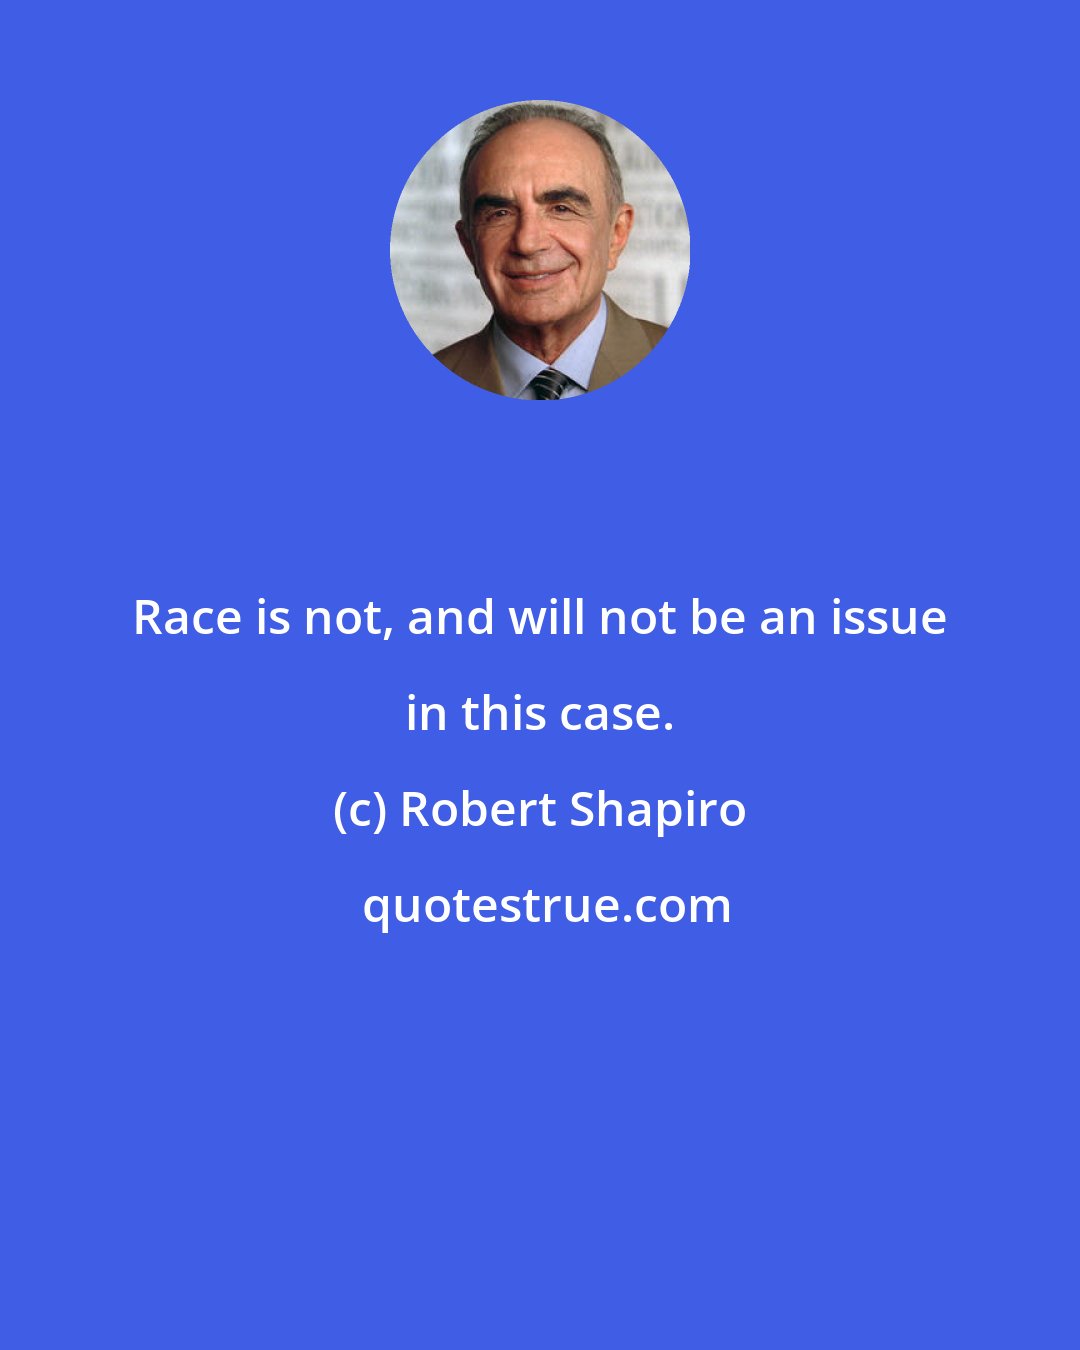 Robert Shapiro: Race is not, and will not be an issue in this case.